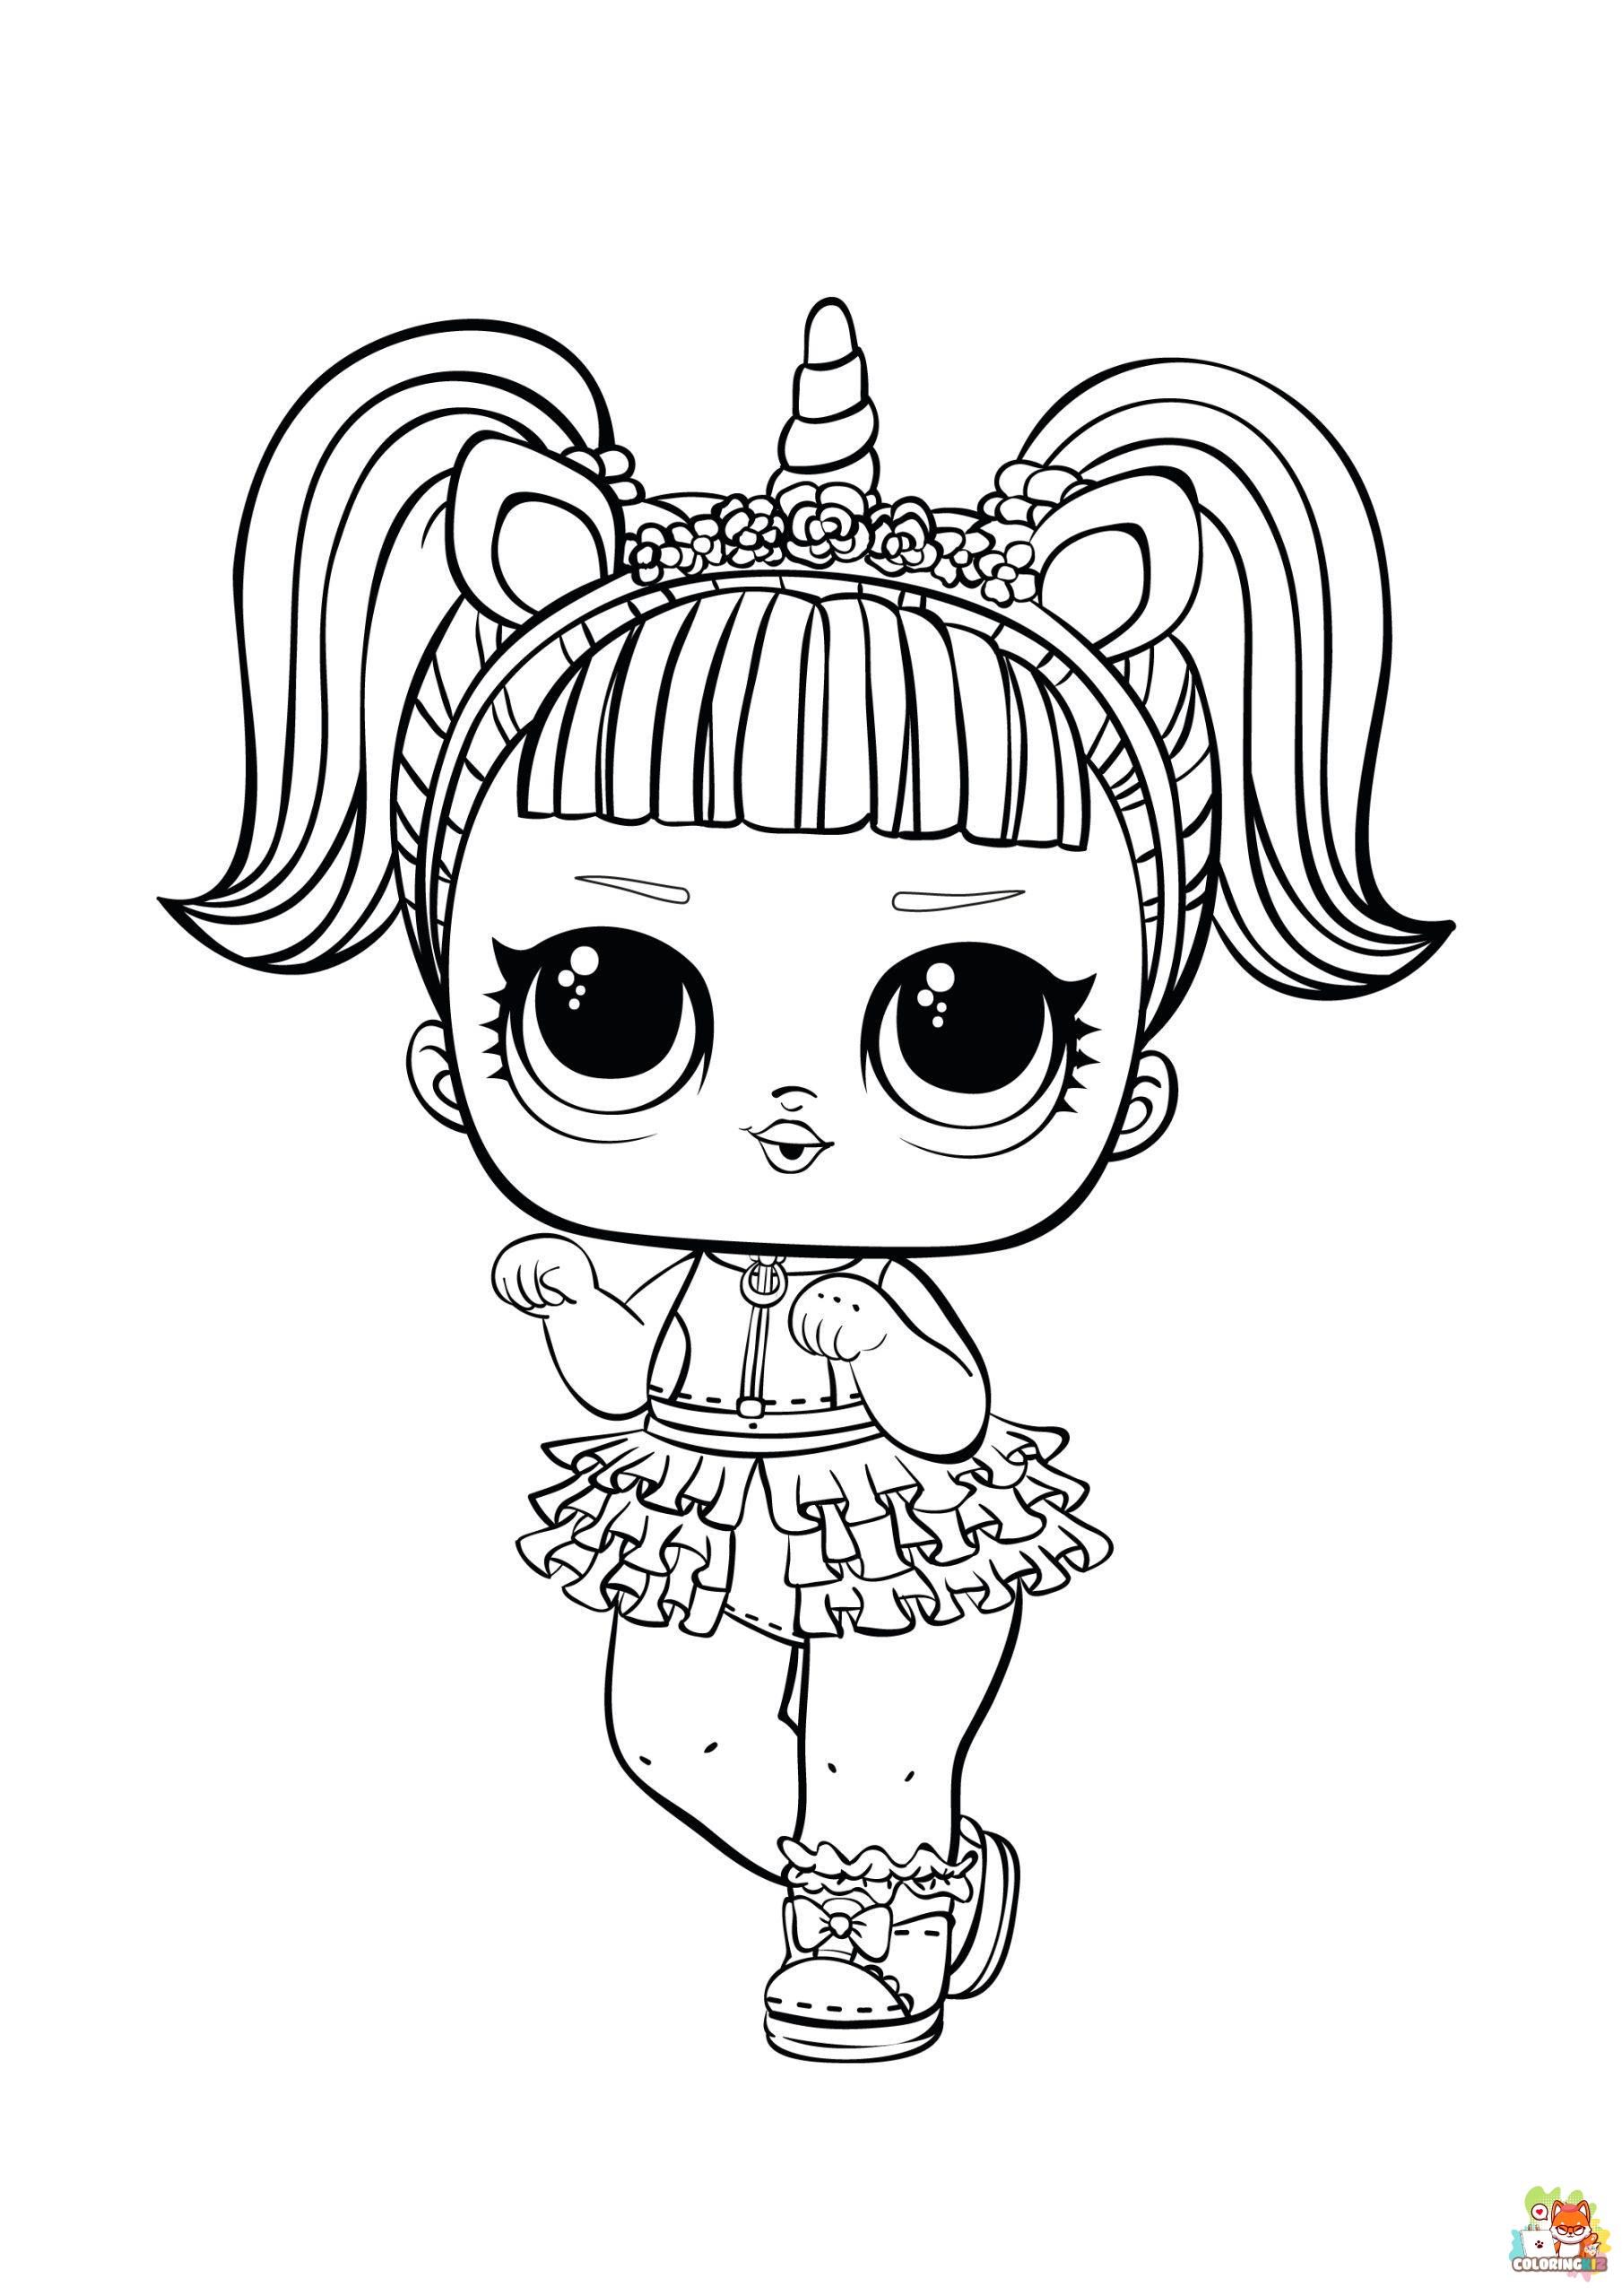 Unicorn LOL Coloring Pages 4